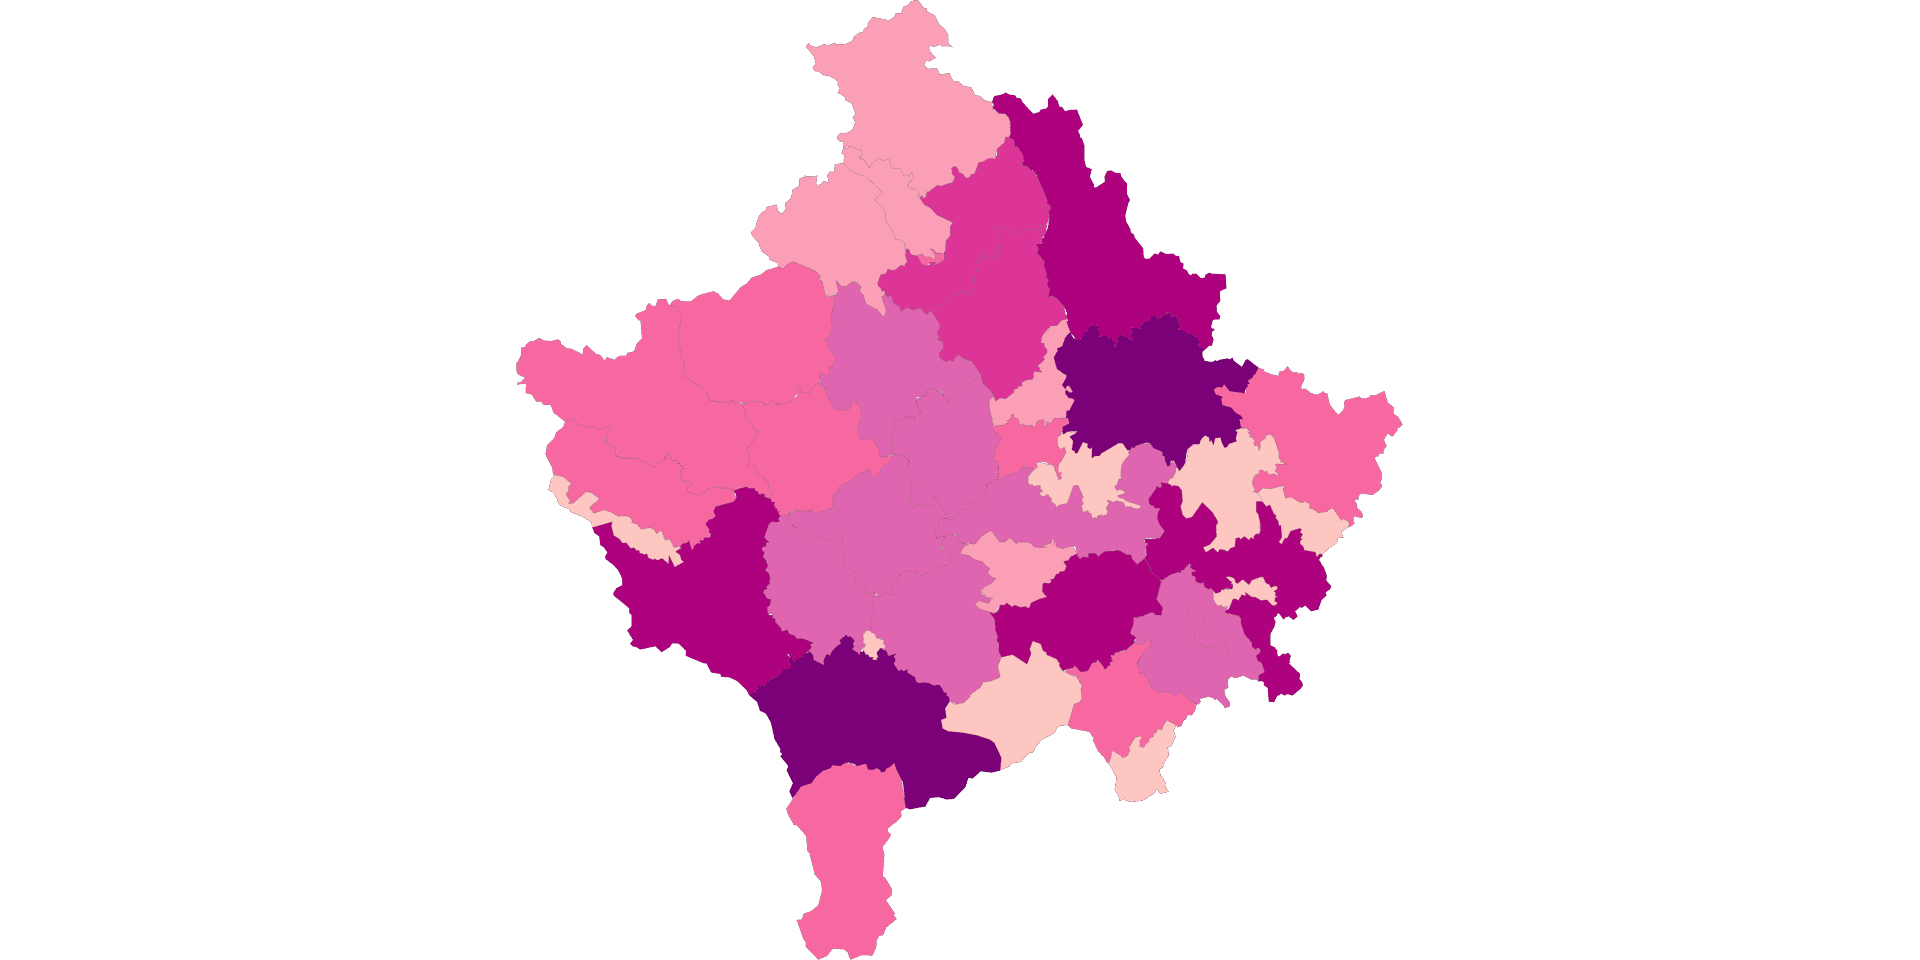 Kosovo Access to Services by Municipality